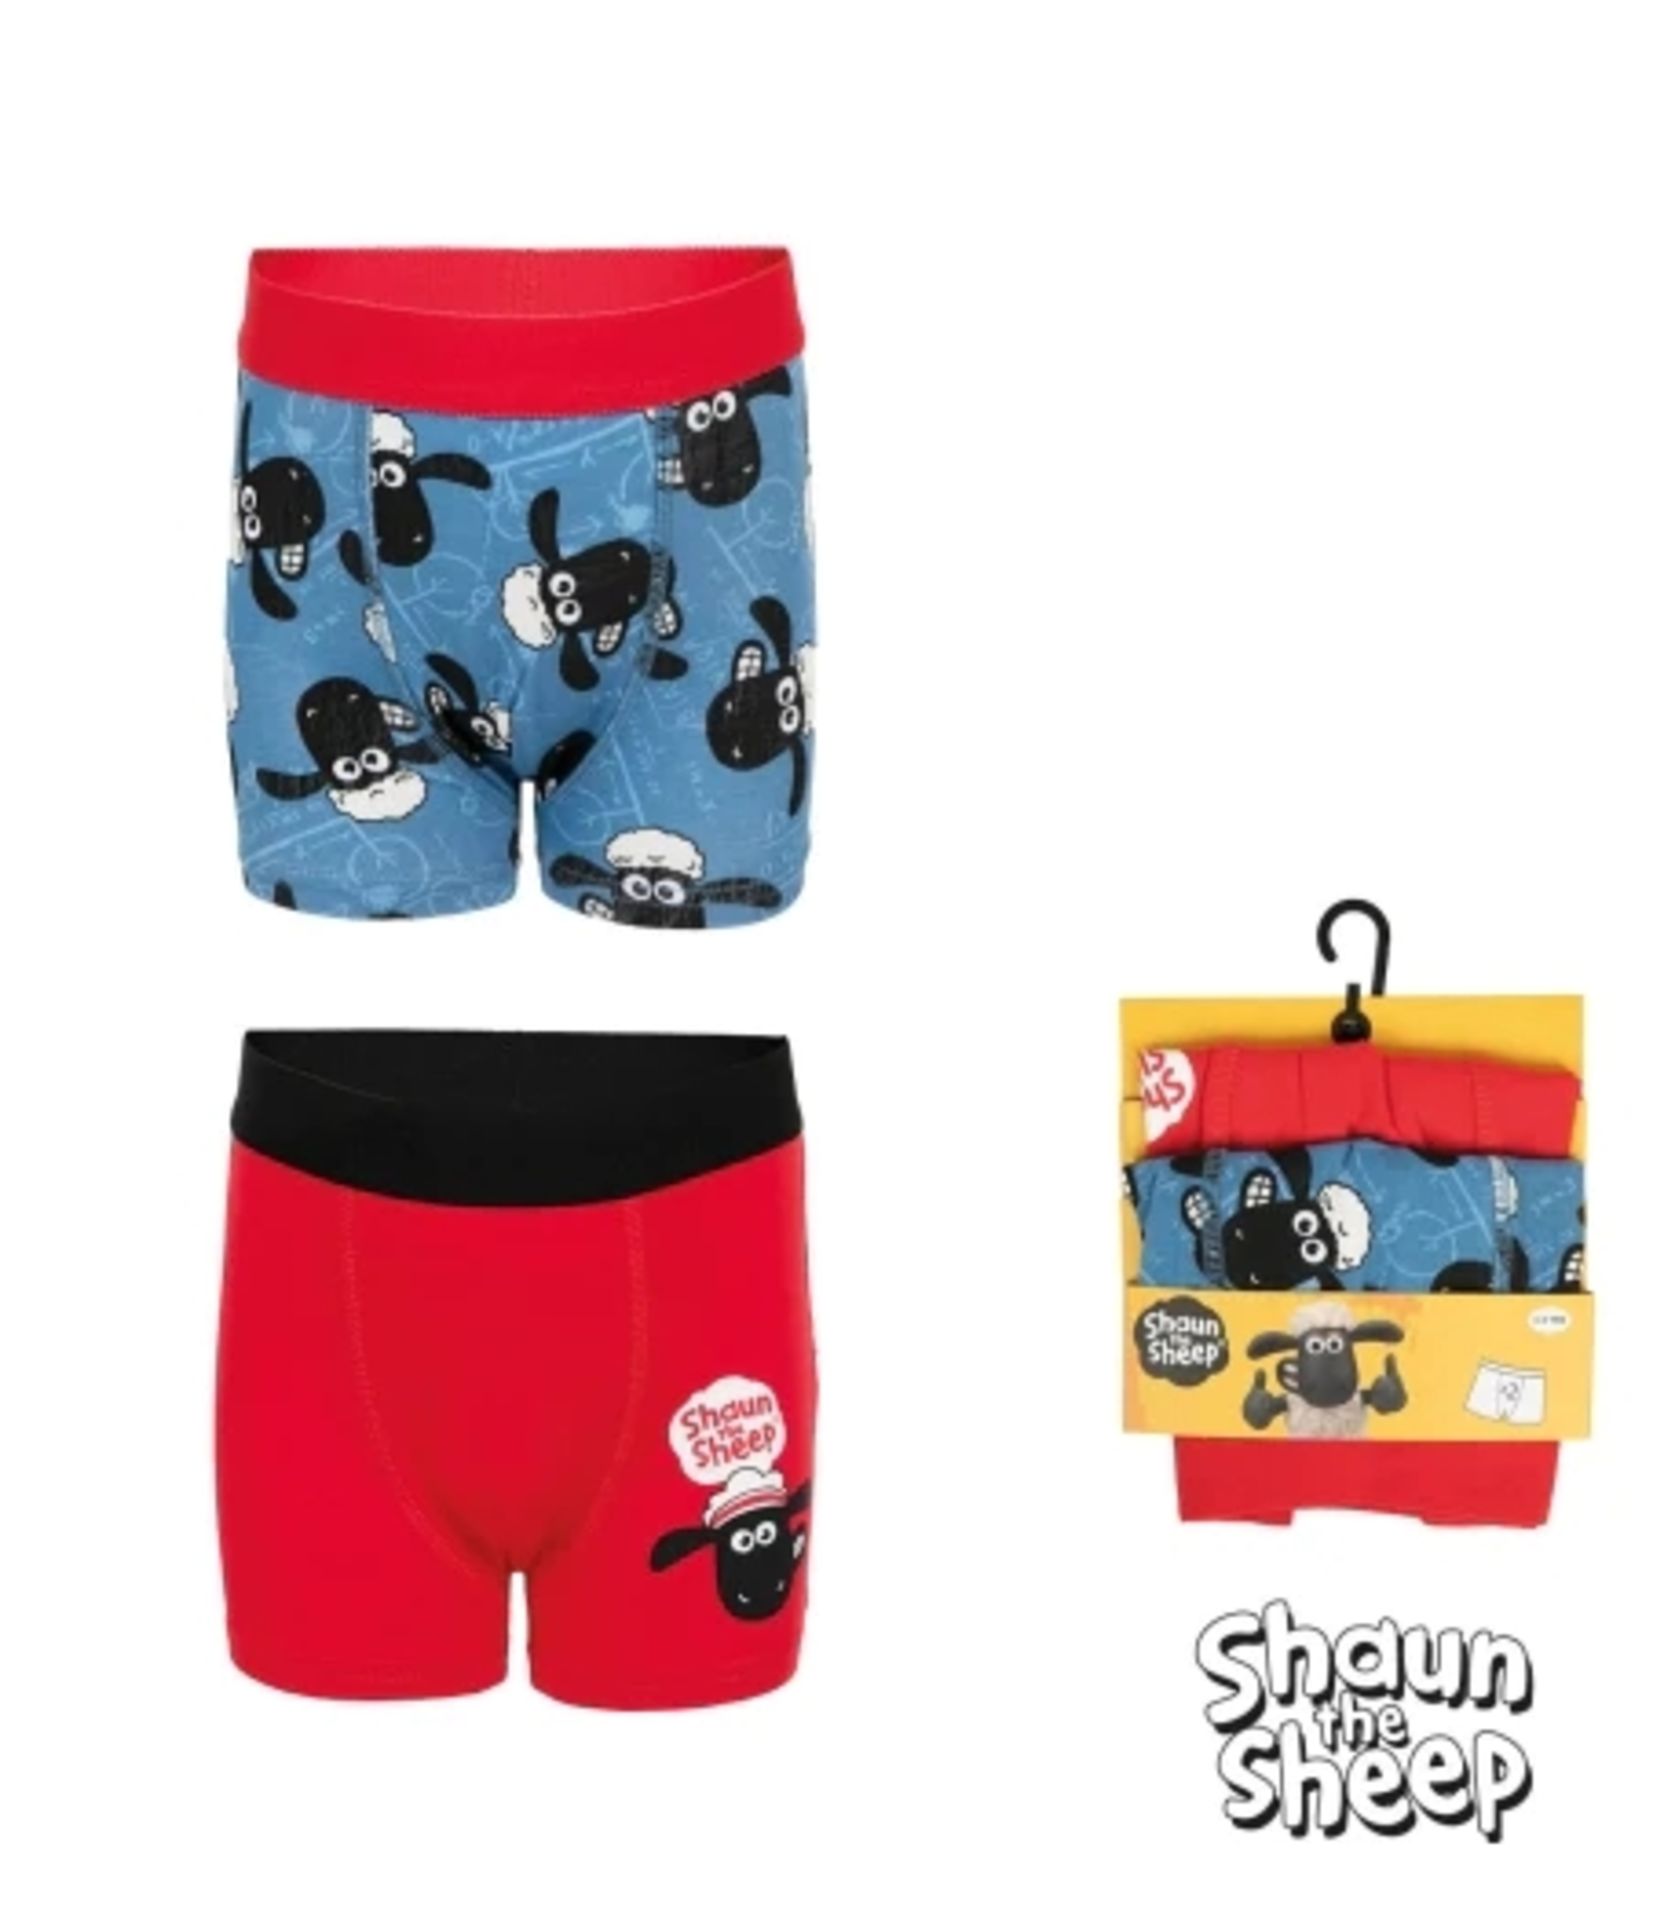 TRADE LOT 200 x New & Packaged Official Licenced Shaun The Sheep Packs of 2 Boxer Shorts. Sizes: 1- - Image 2 of 2